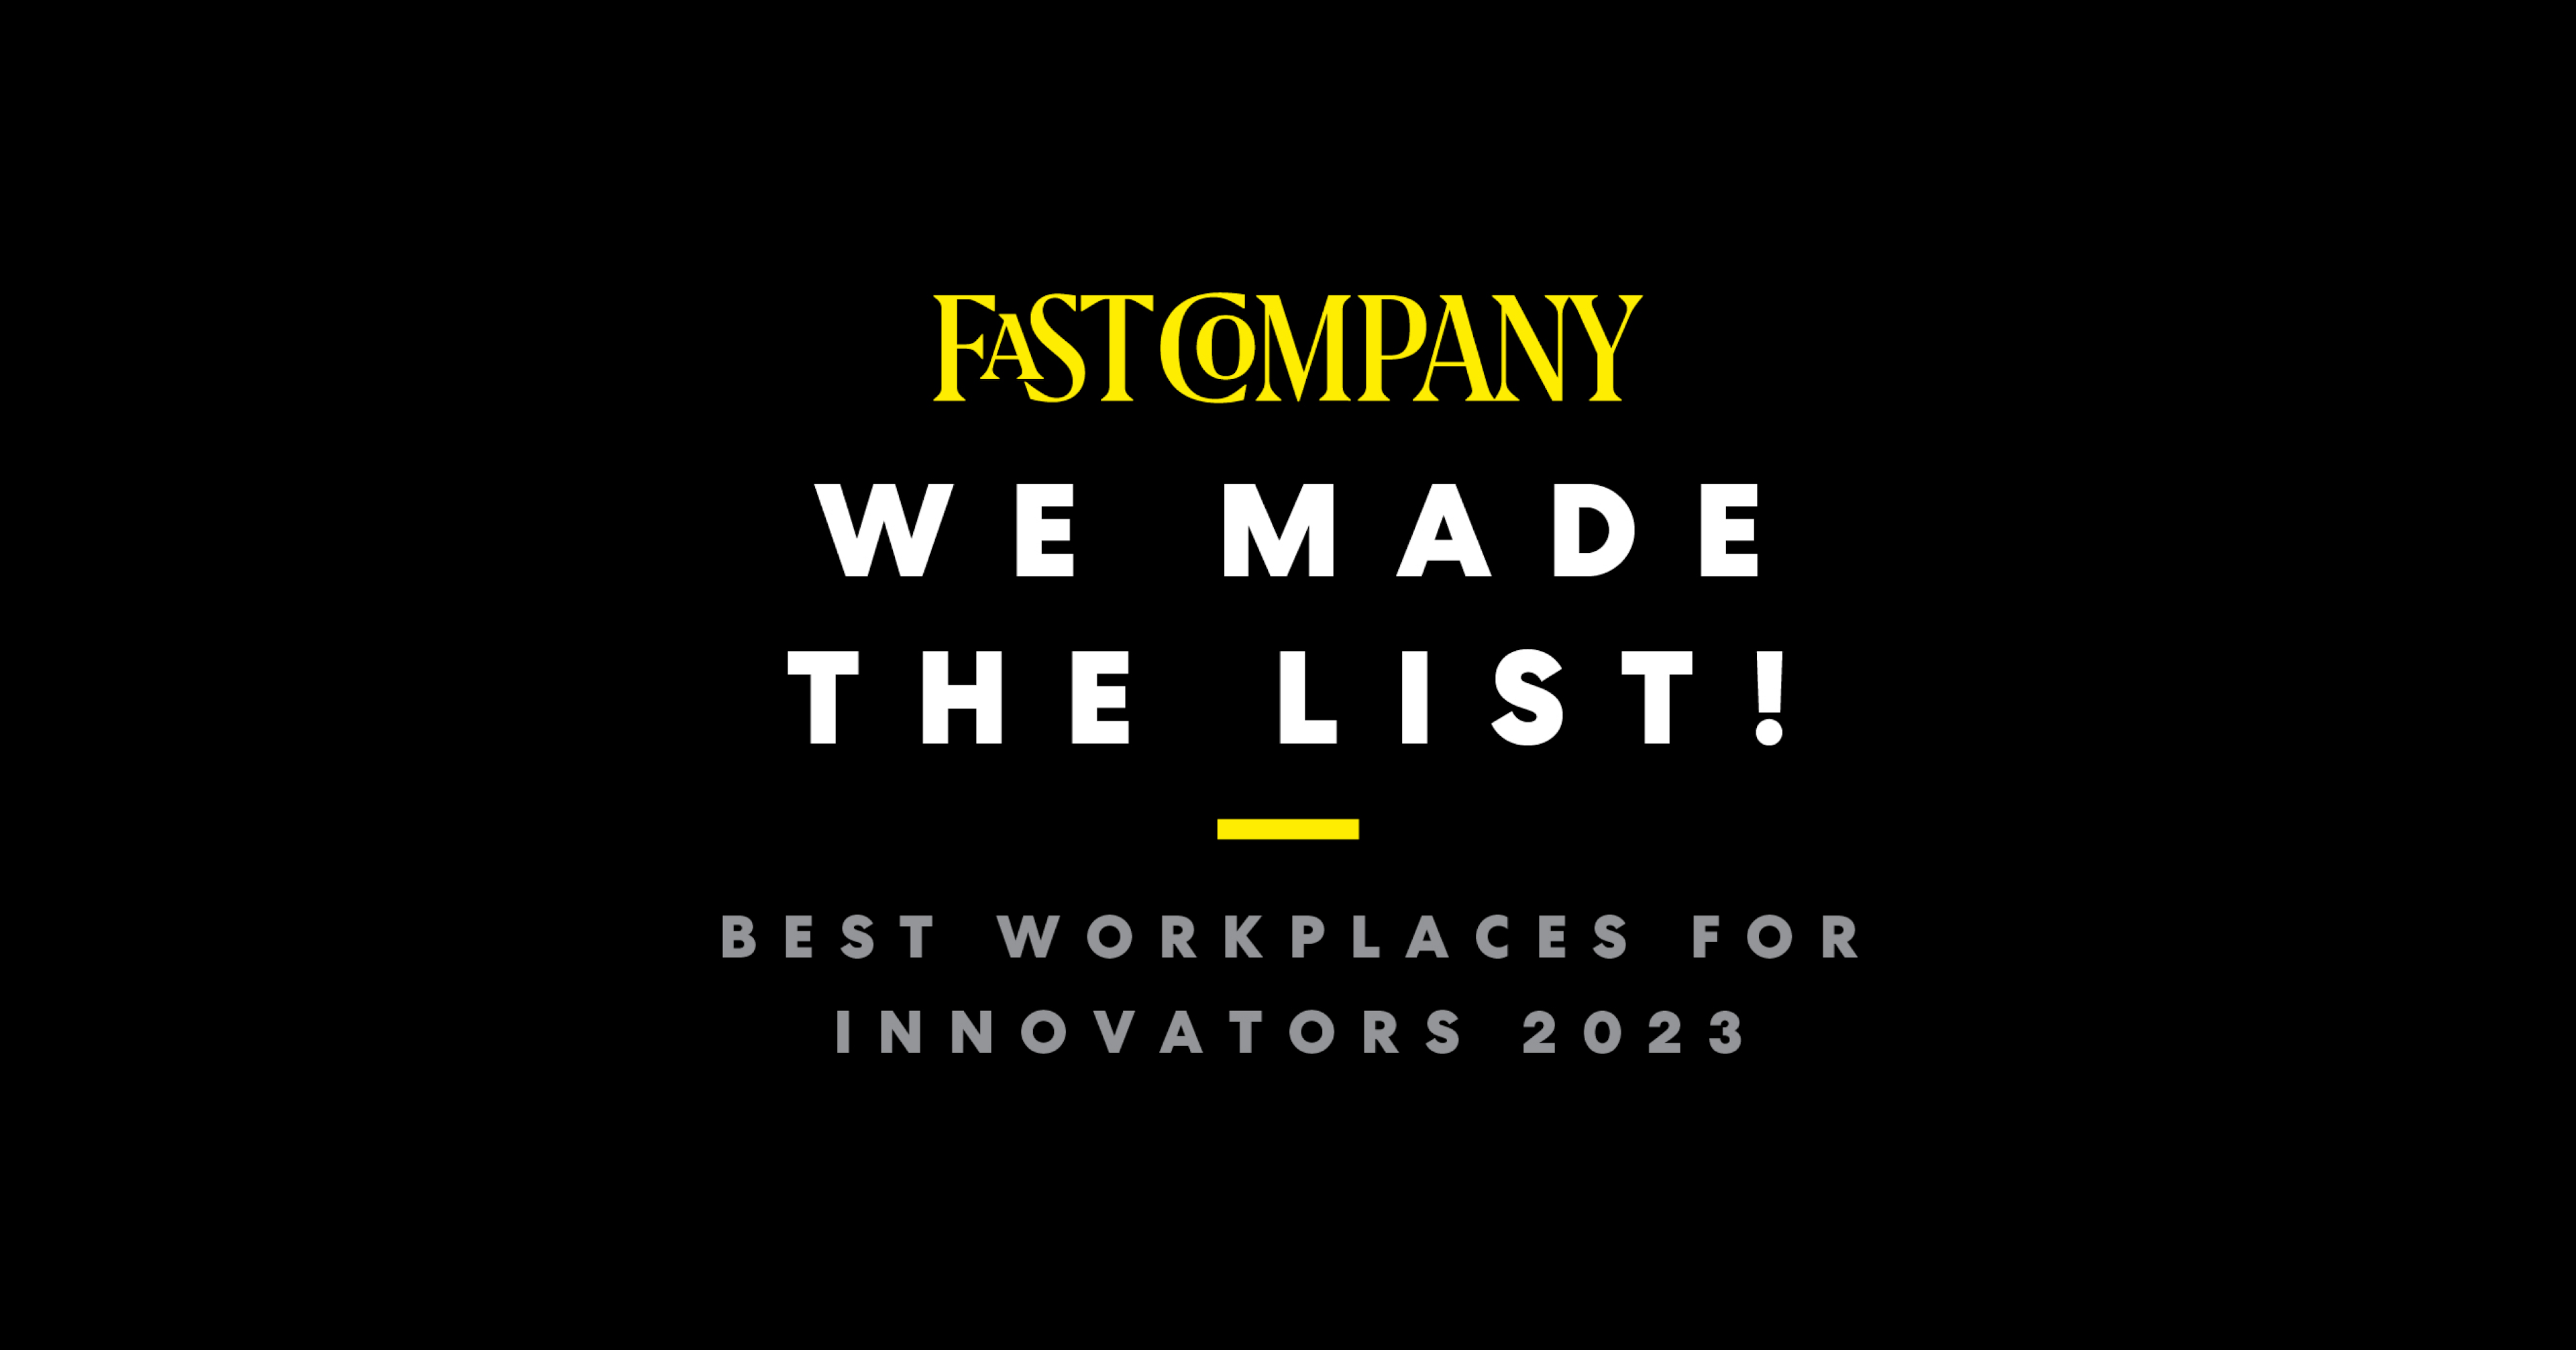 Curative's Commitment to Innovation Recognized in Fast Company's 2023 “Best Workplaces for Innovators Health and Wellness List"